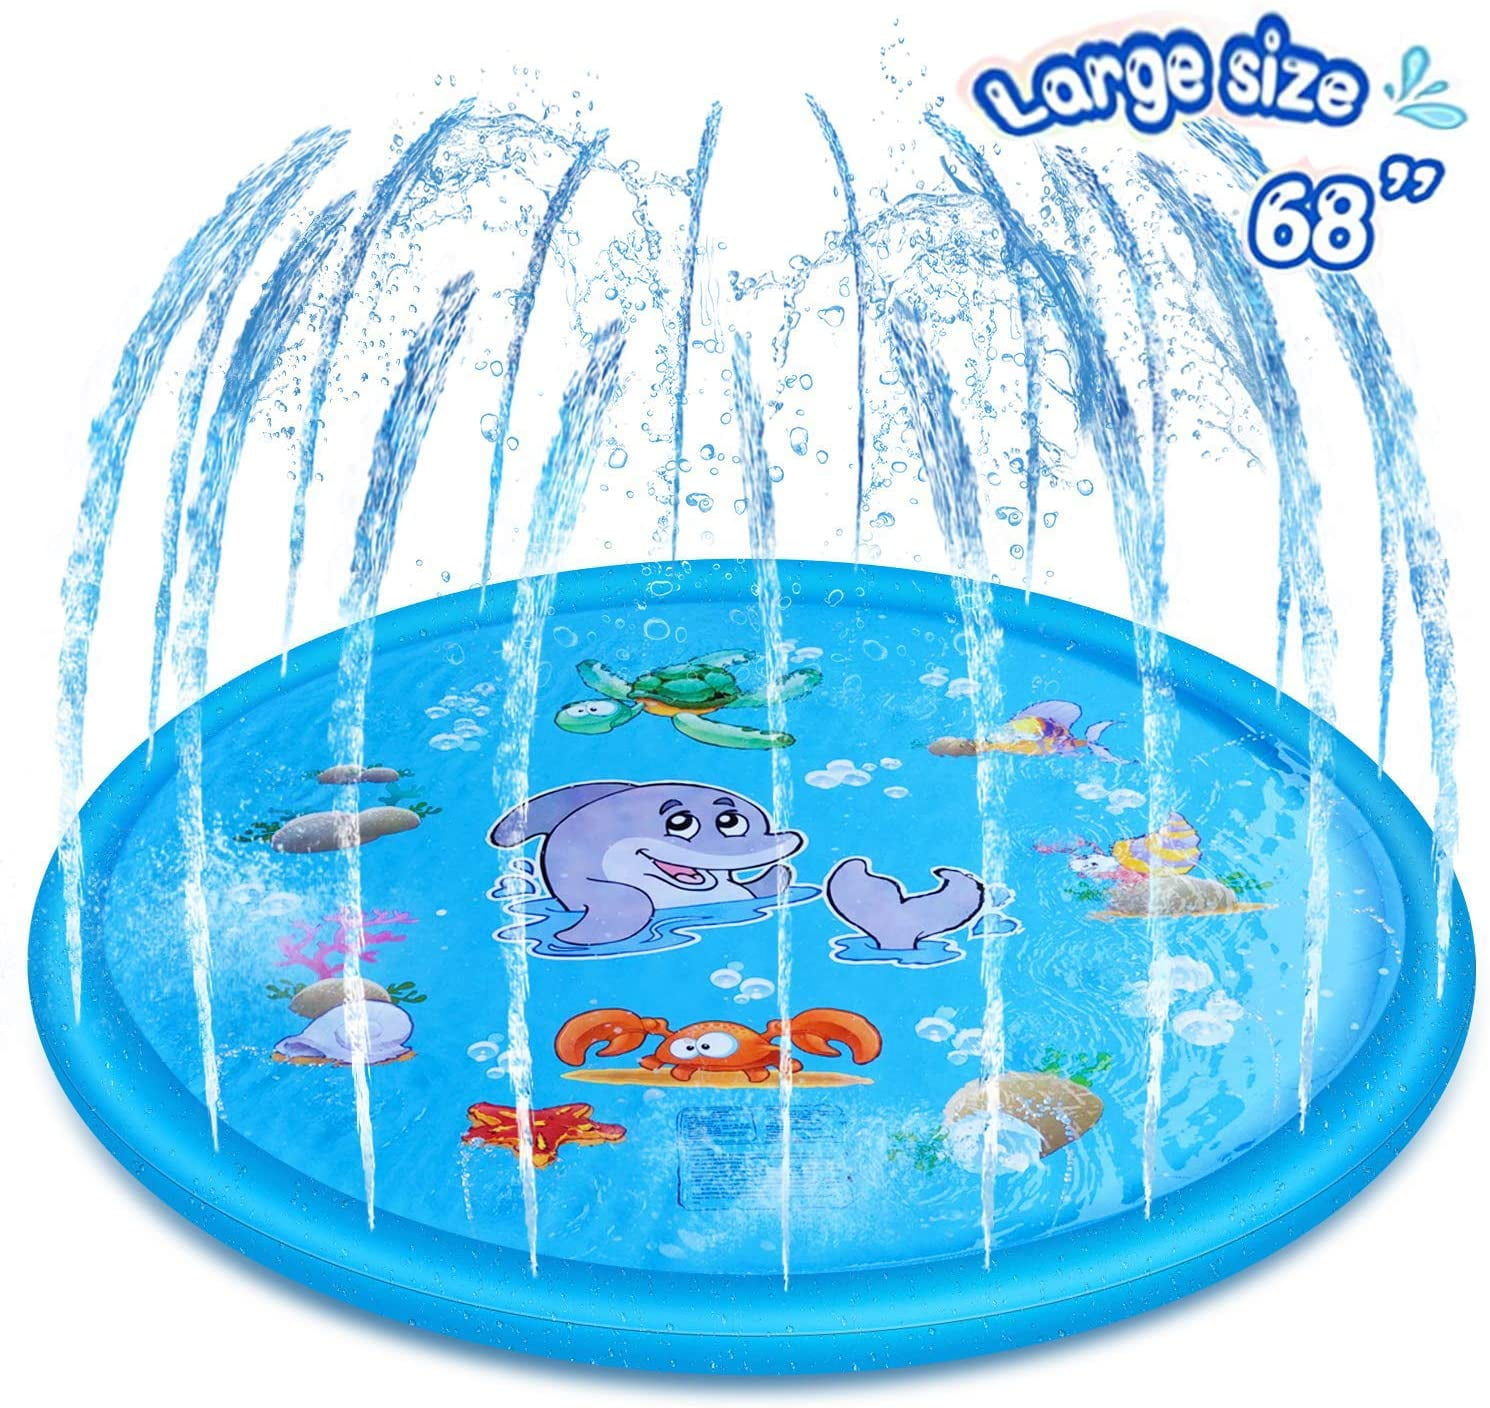 70 Inch Large Sprinkle and Splash Play Mat for Kids Boys Girls Fun Splash Play Mat Summer Outdoor Sprinkler Pad Party Water Toys Durable Children’s Sprinkler Pool Sprinkler Toy Wilbest Splash Pad 